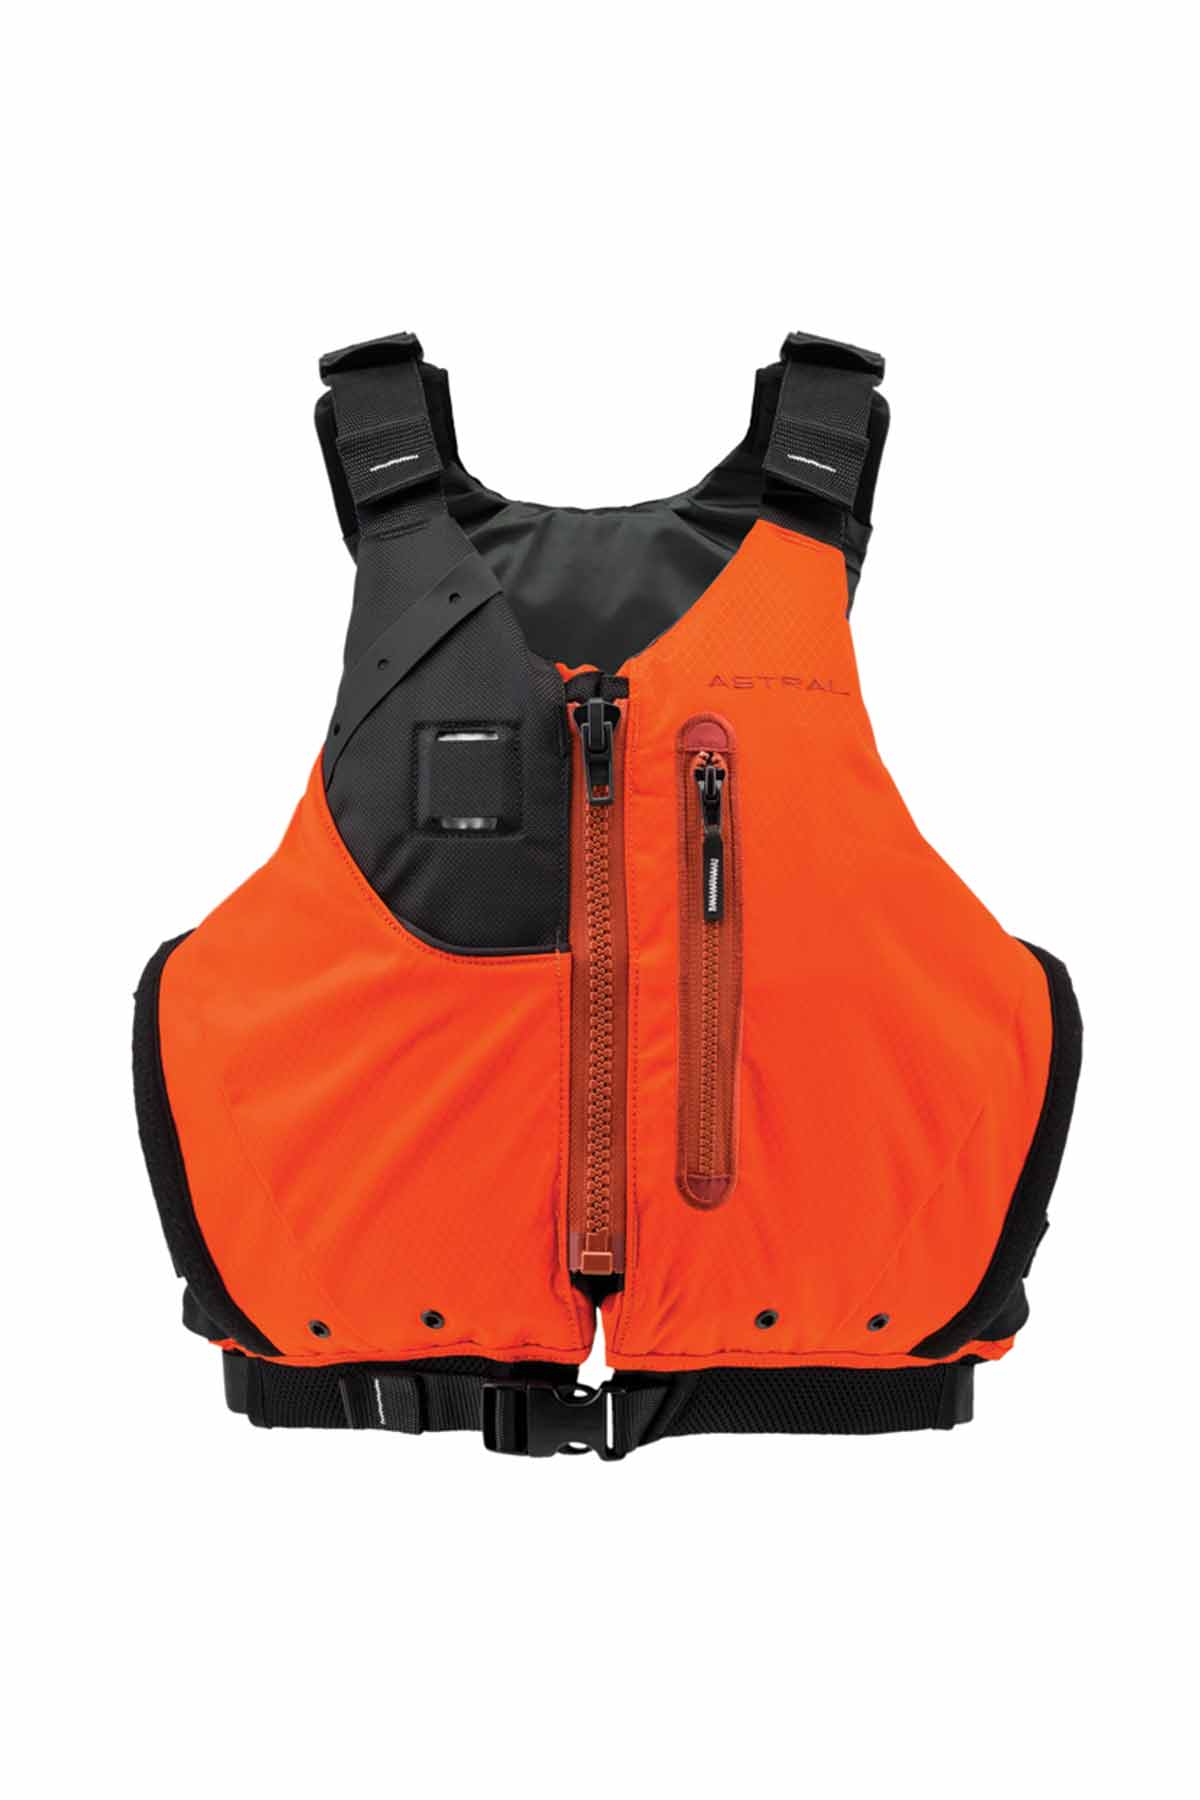 Astral Ceiba PFD Fire Orange Front View